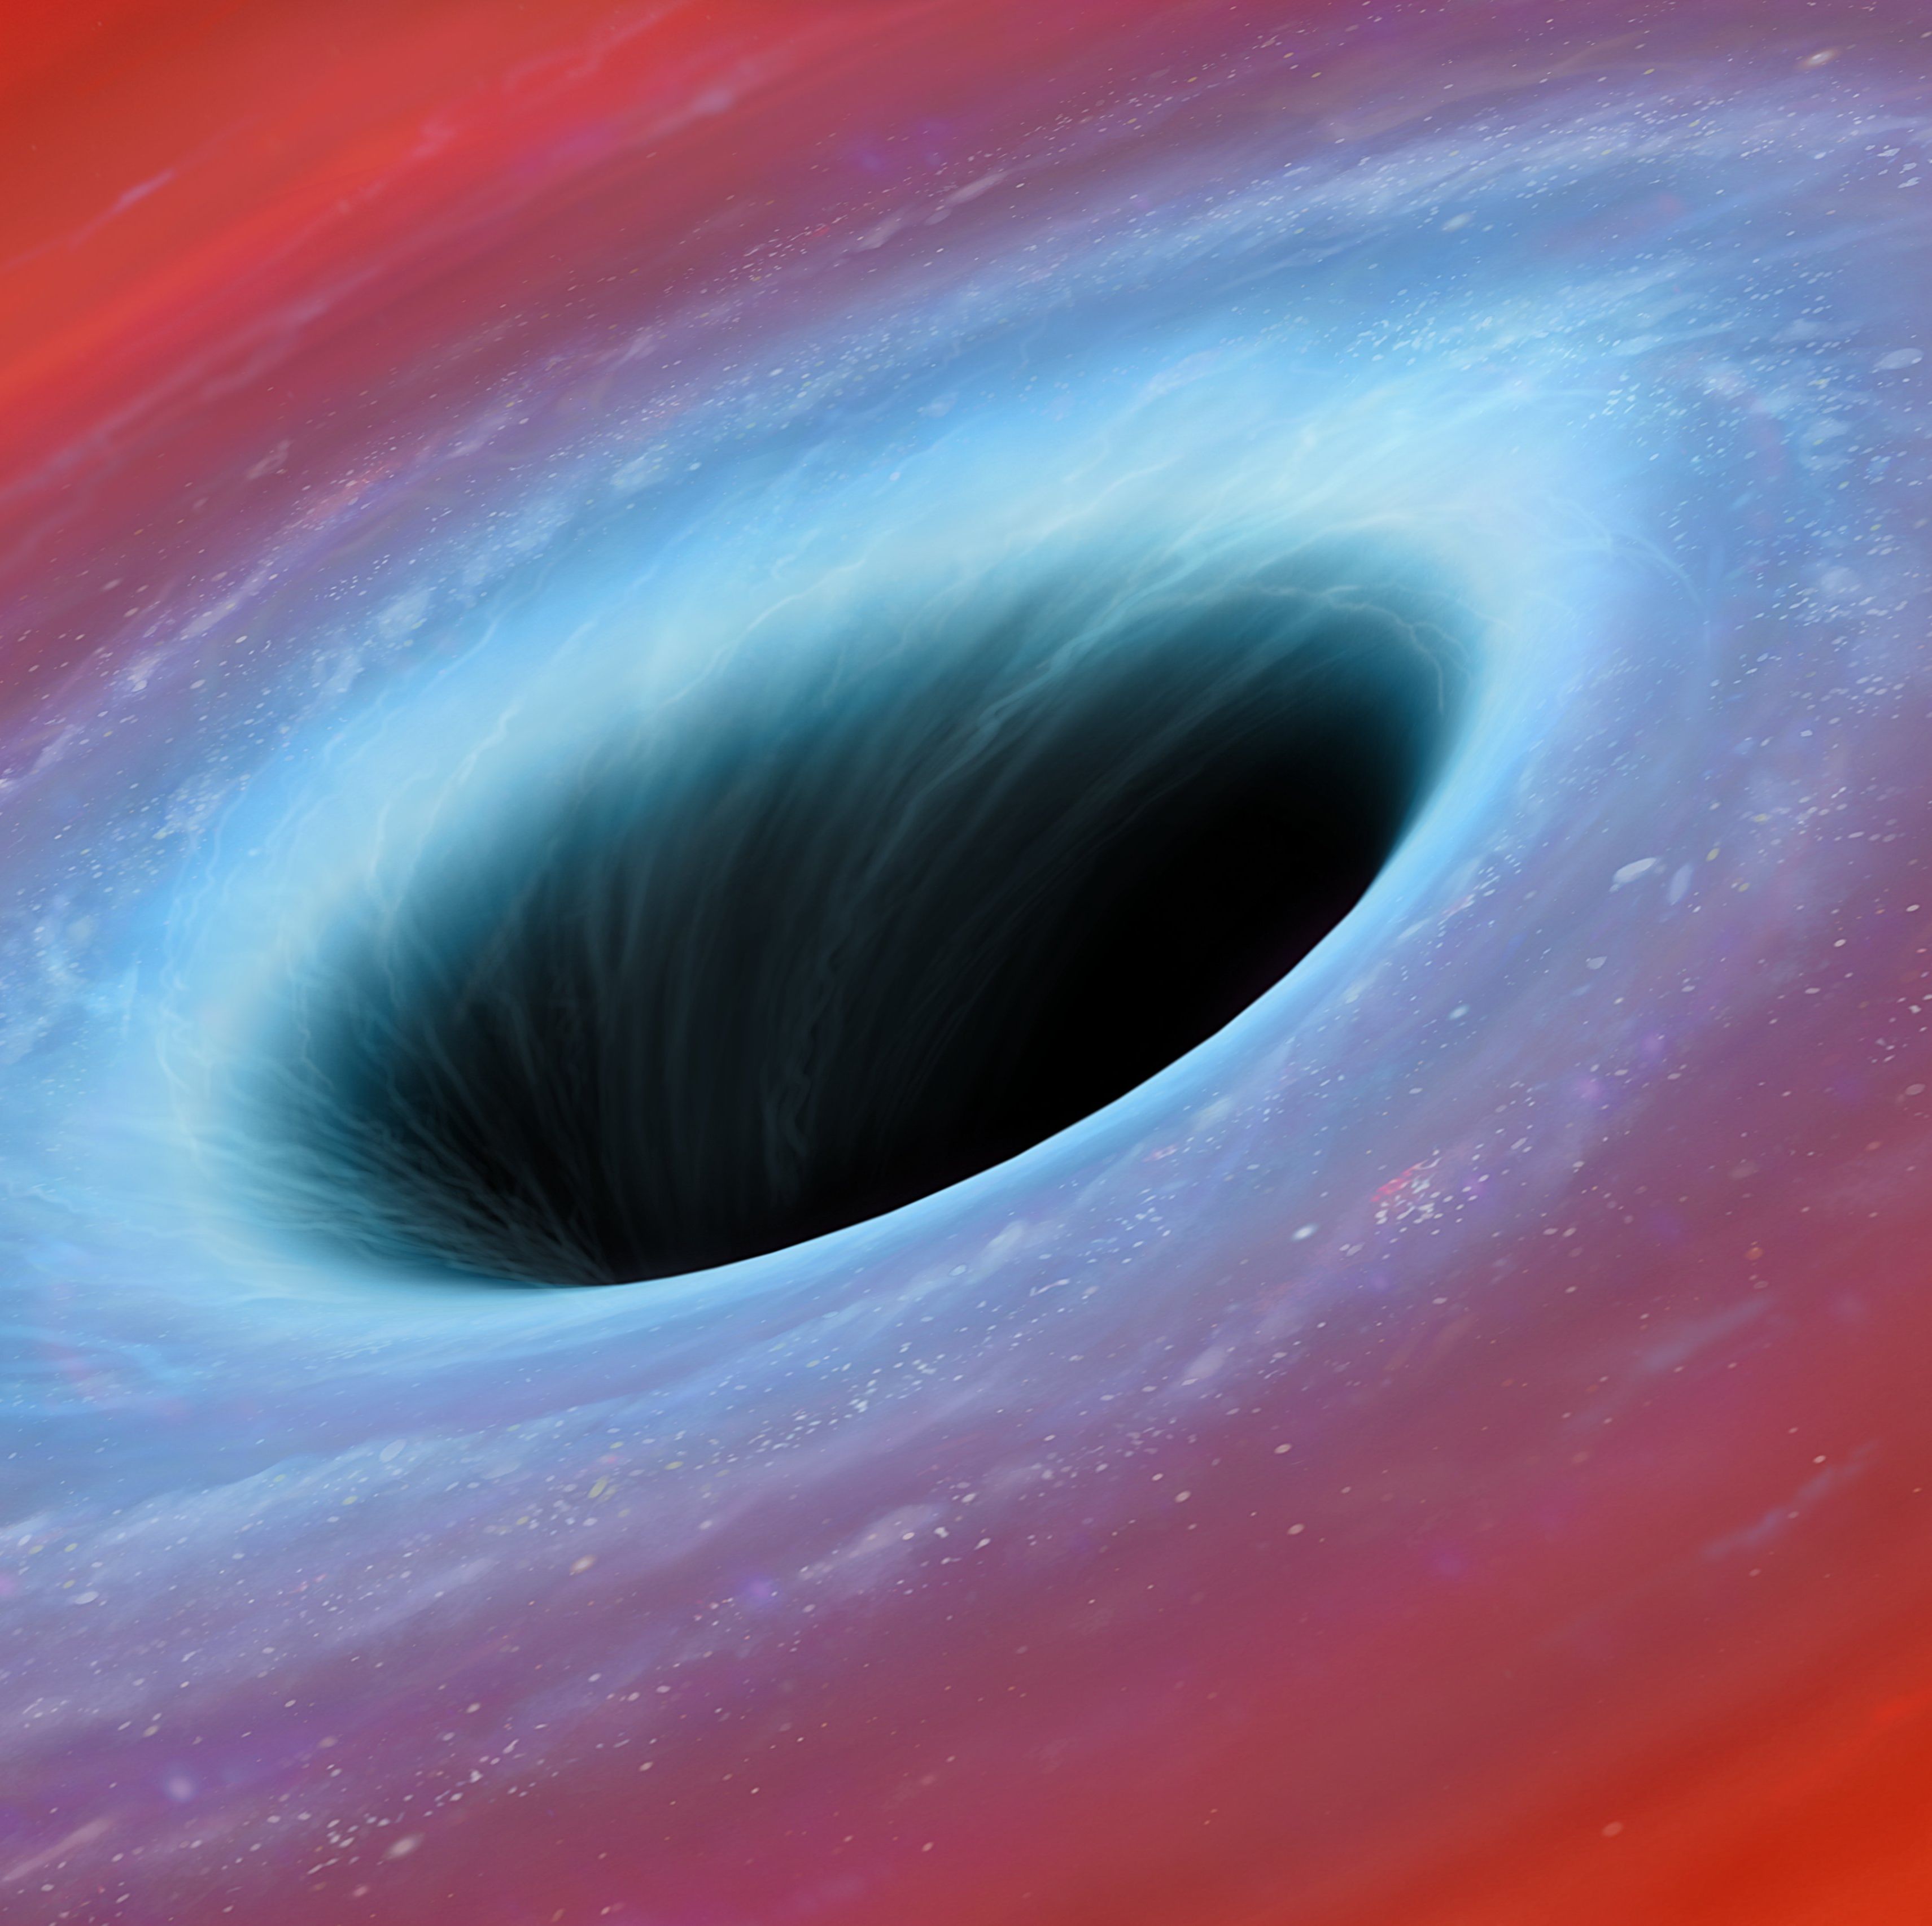 Astronomers Just Found the Closest Black Hole to Earth. Until Now, It Was Invisible